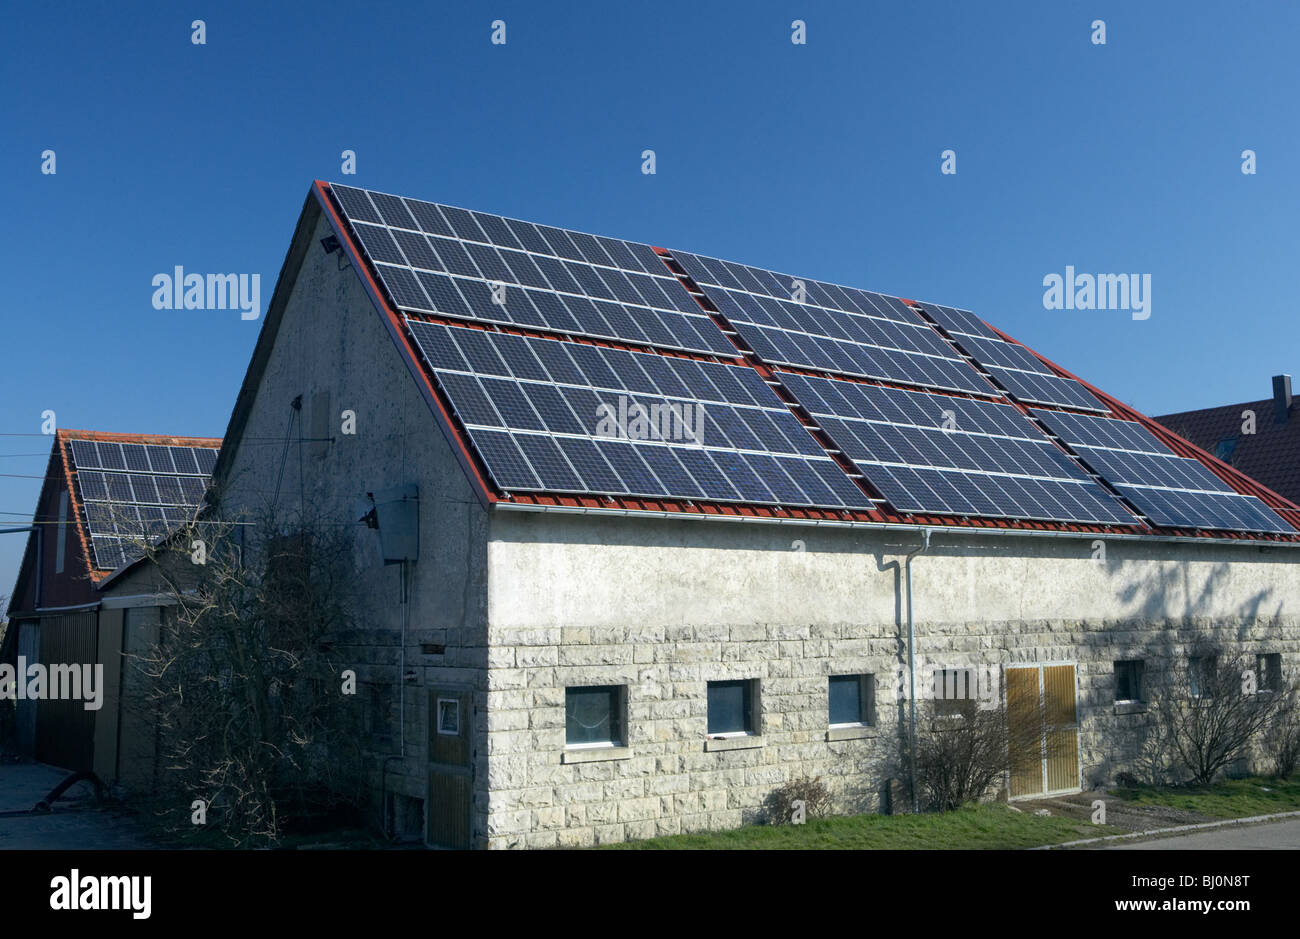 Solar cells on the roofs at a farmstead, Herboldshausen, Germany Stock Photo